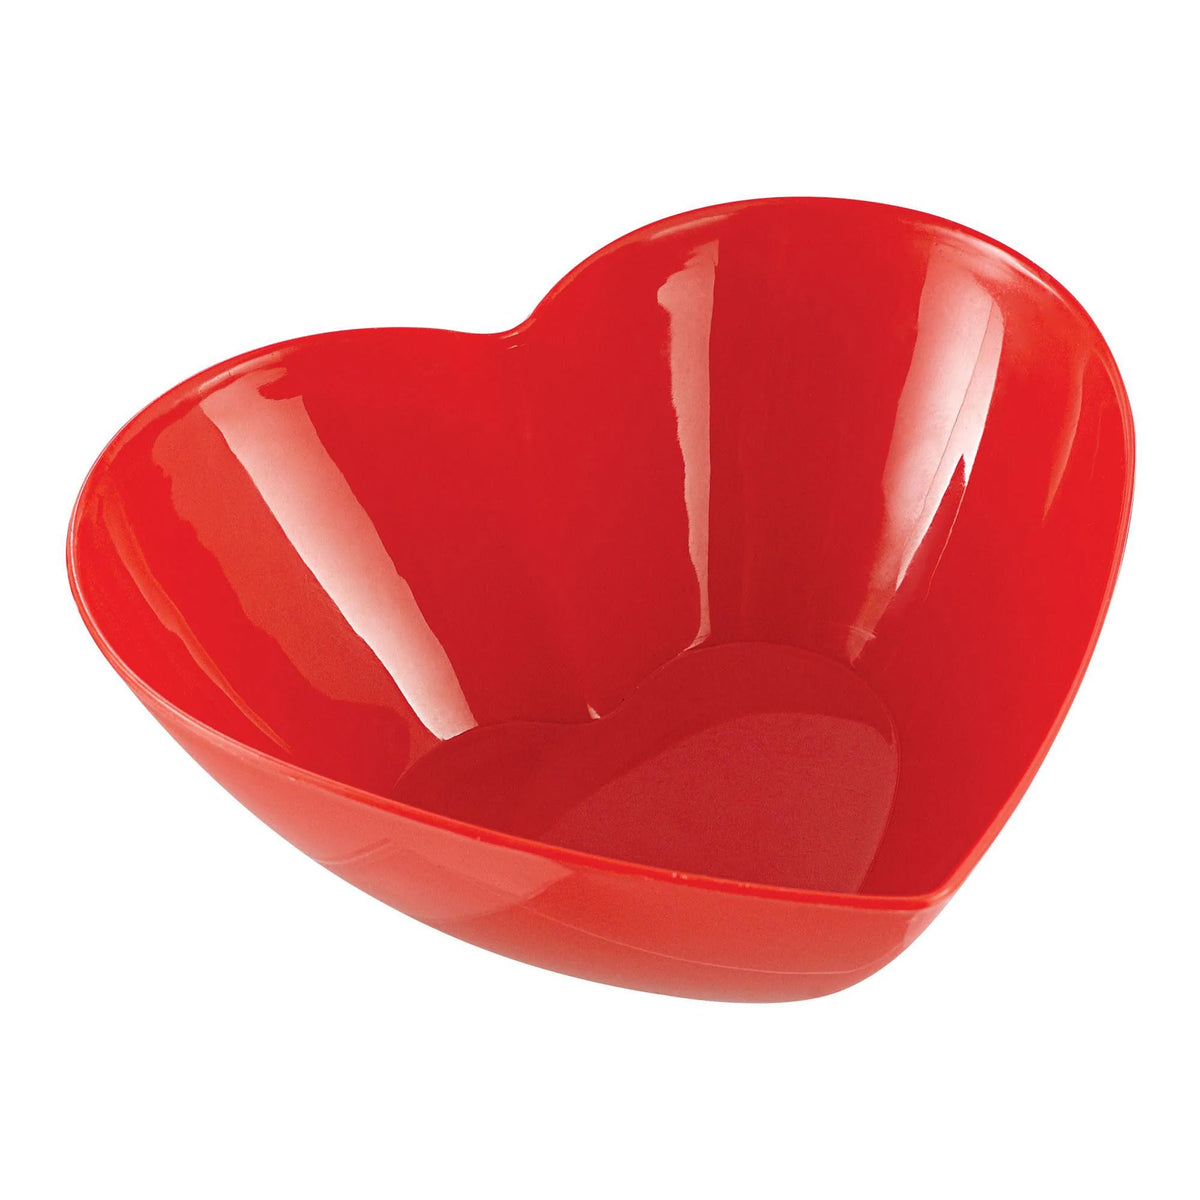 AMSCAN CA Valentine's Day Heart Shaped Plastic Bowl, 42 Oz, 1 Count